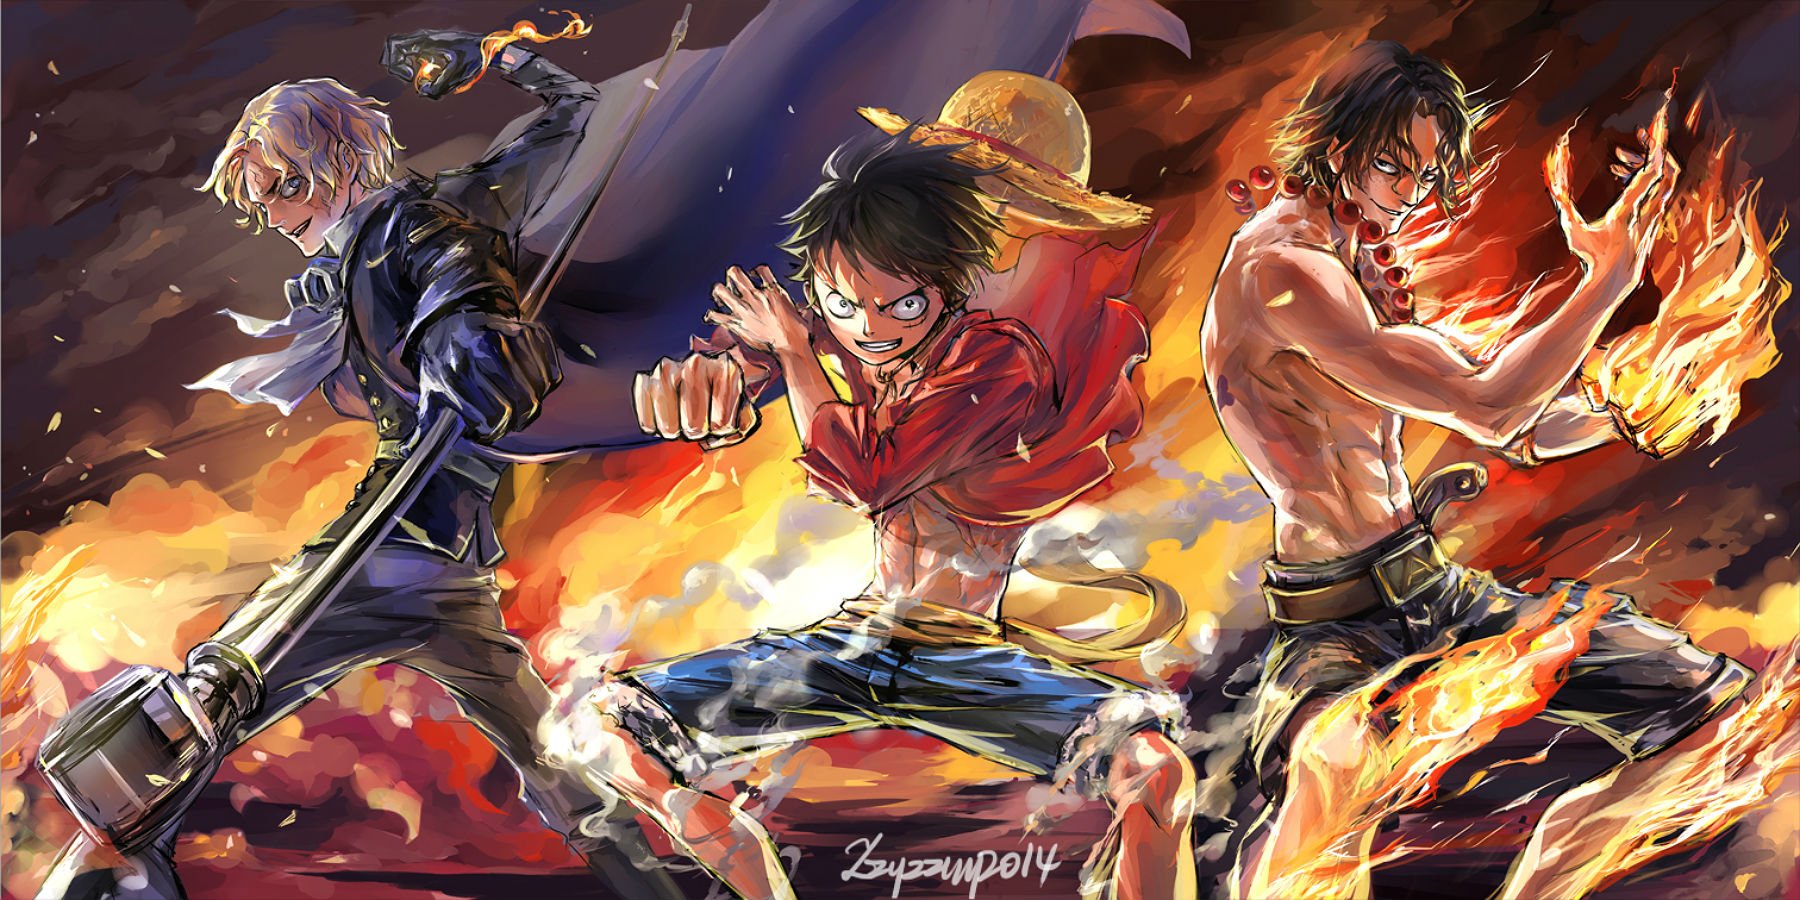  HD Wallpapers for One Piece Lovers Anime Blog